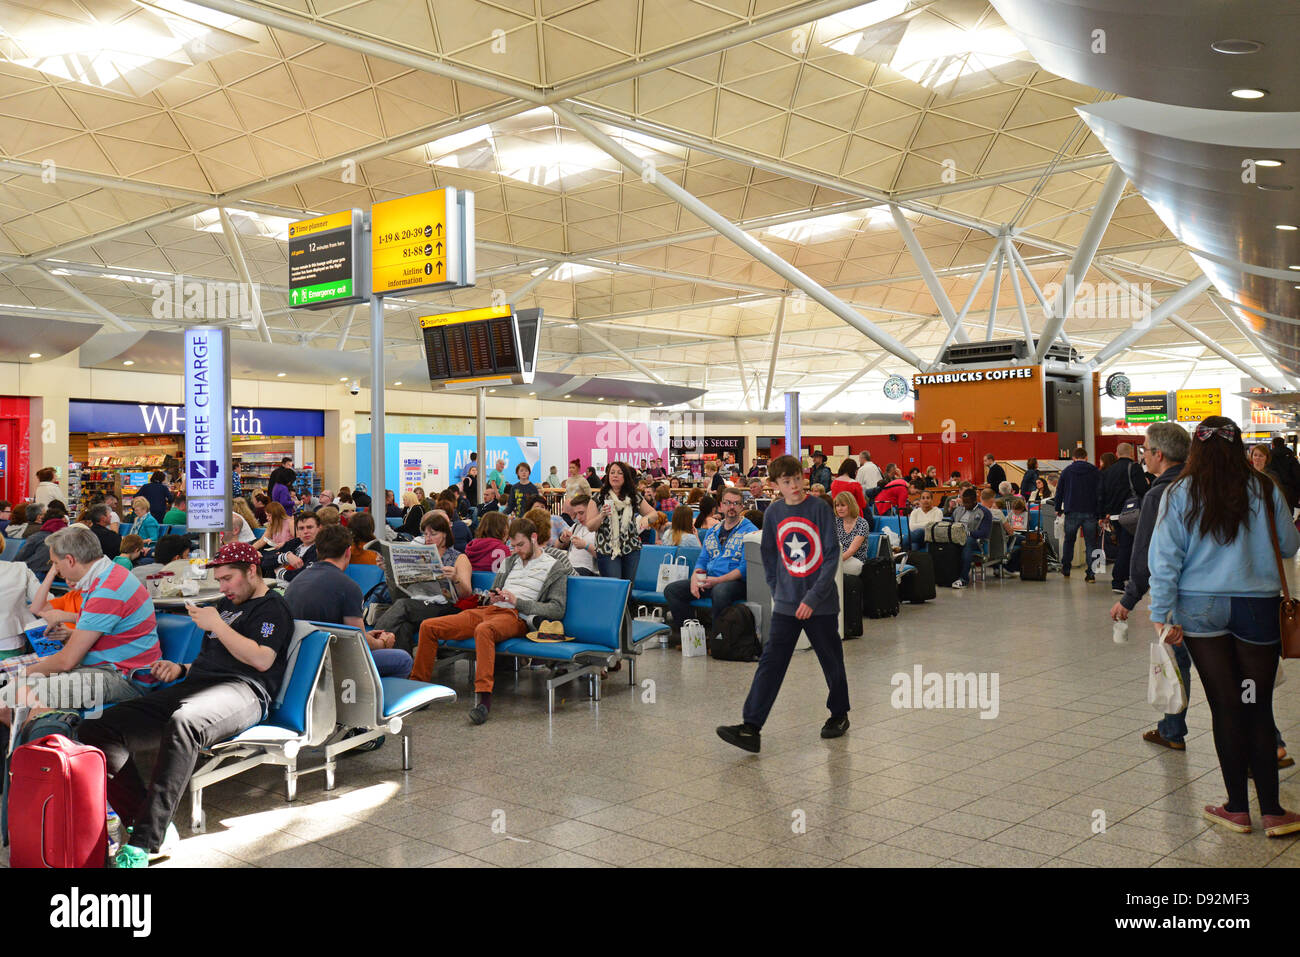 Crowded departure lounge at Stansted Airport, Stansted Mountfitchet, Essex, England, United Kingdom Stock Photo